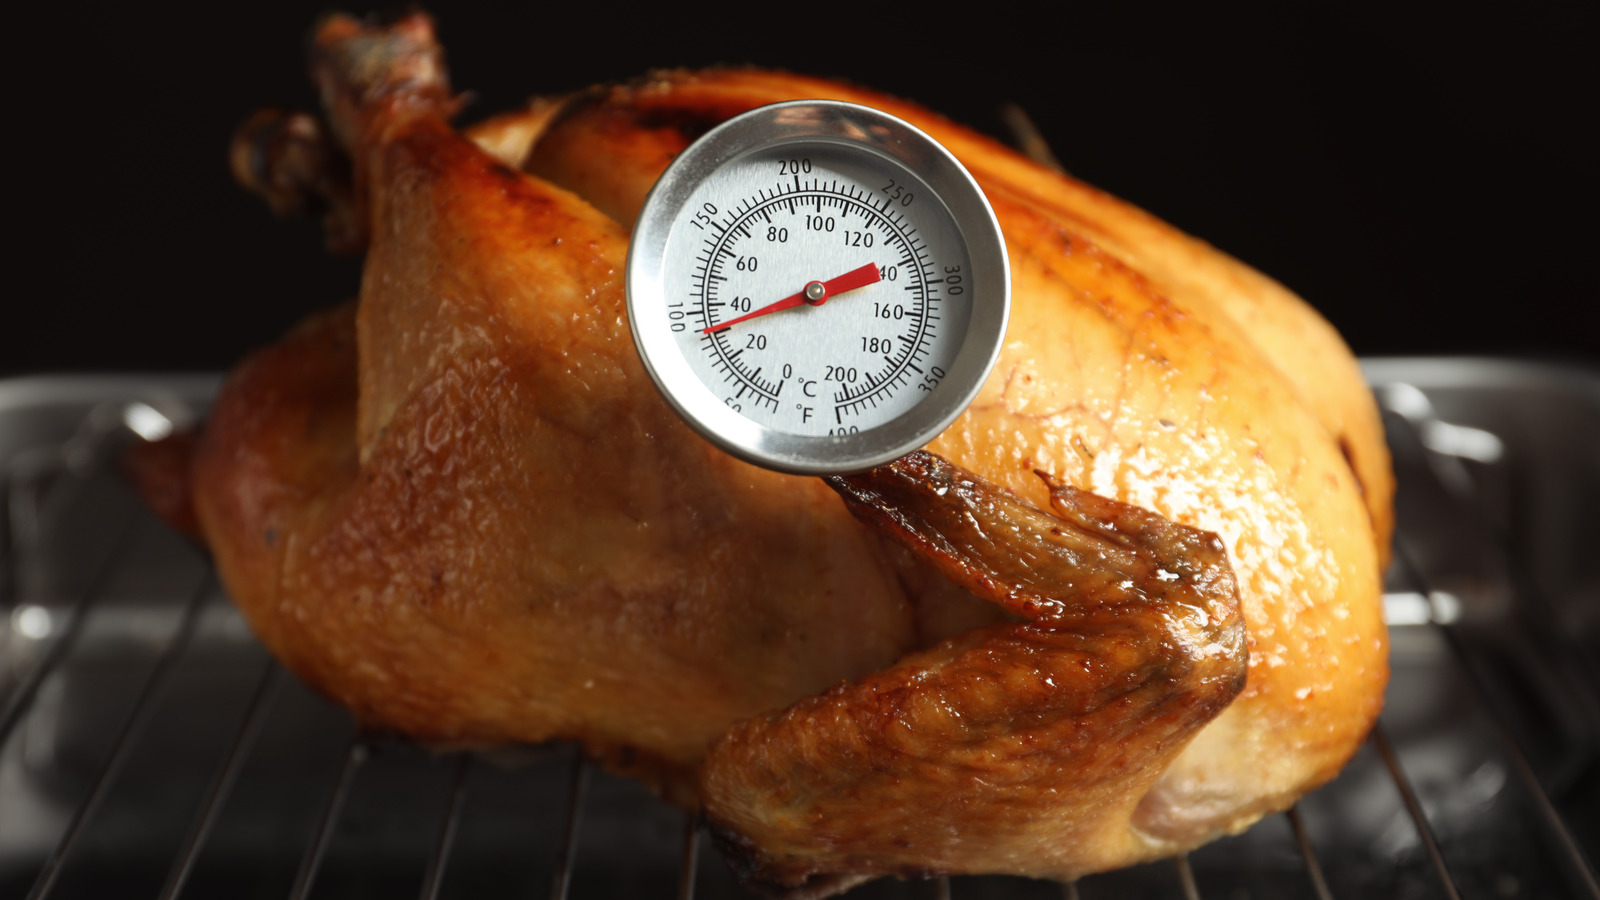 https://www.mashed.com/img/gallery/why-you-should-always-use-a-meat-thermometer-according-to-the-usda/l-intro-1659033985.jpg